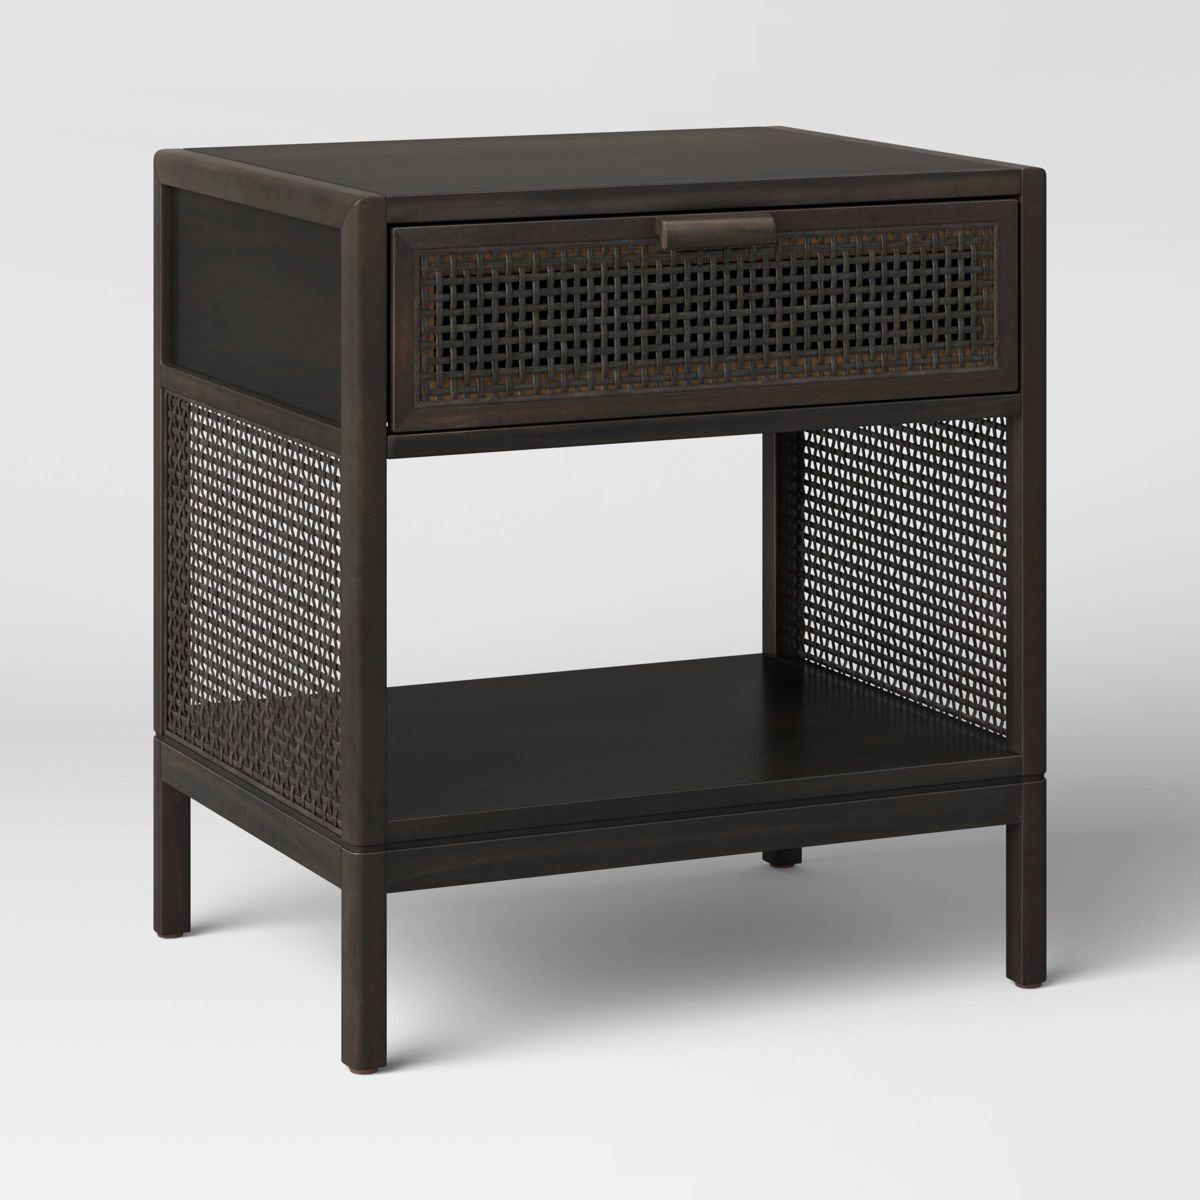 Minsmere Caned Accent Table with Drawer - Threshold™ | Target